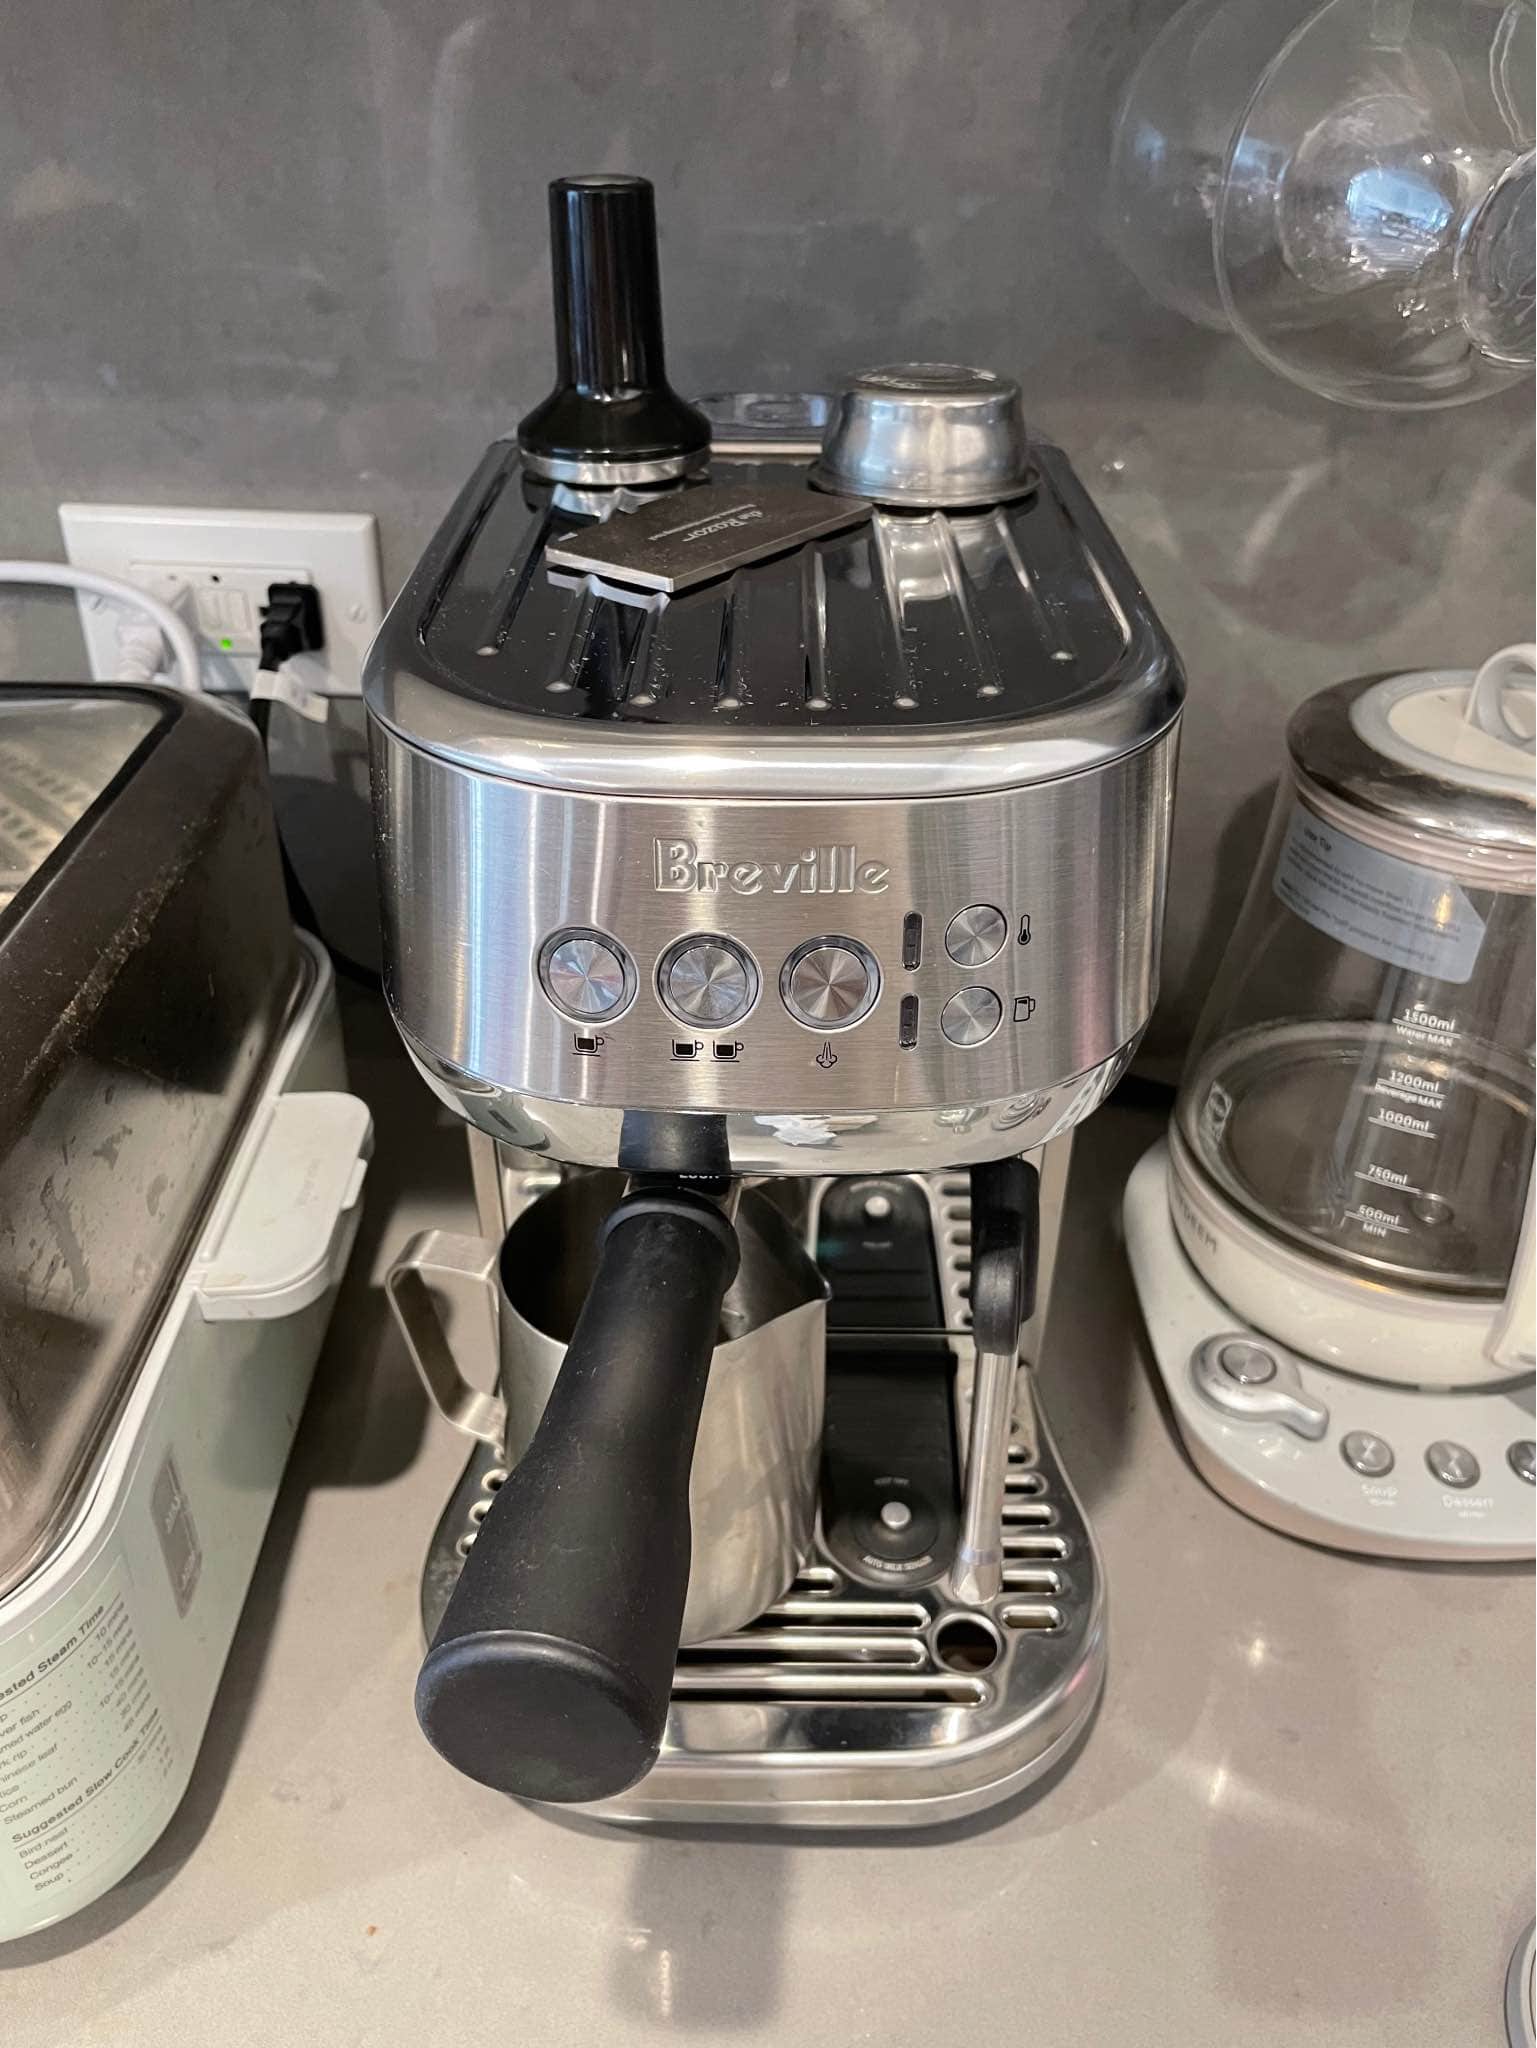 Breville Bambino Plus is fully automatic